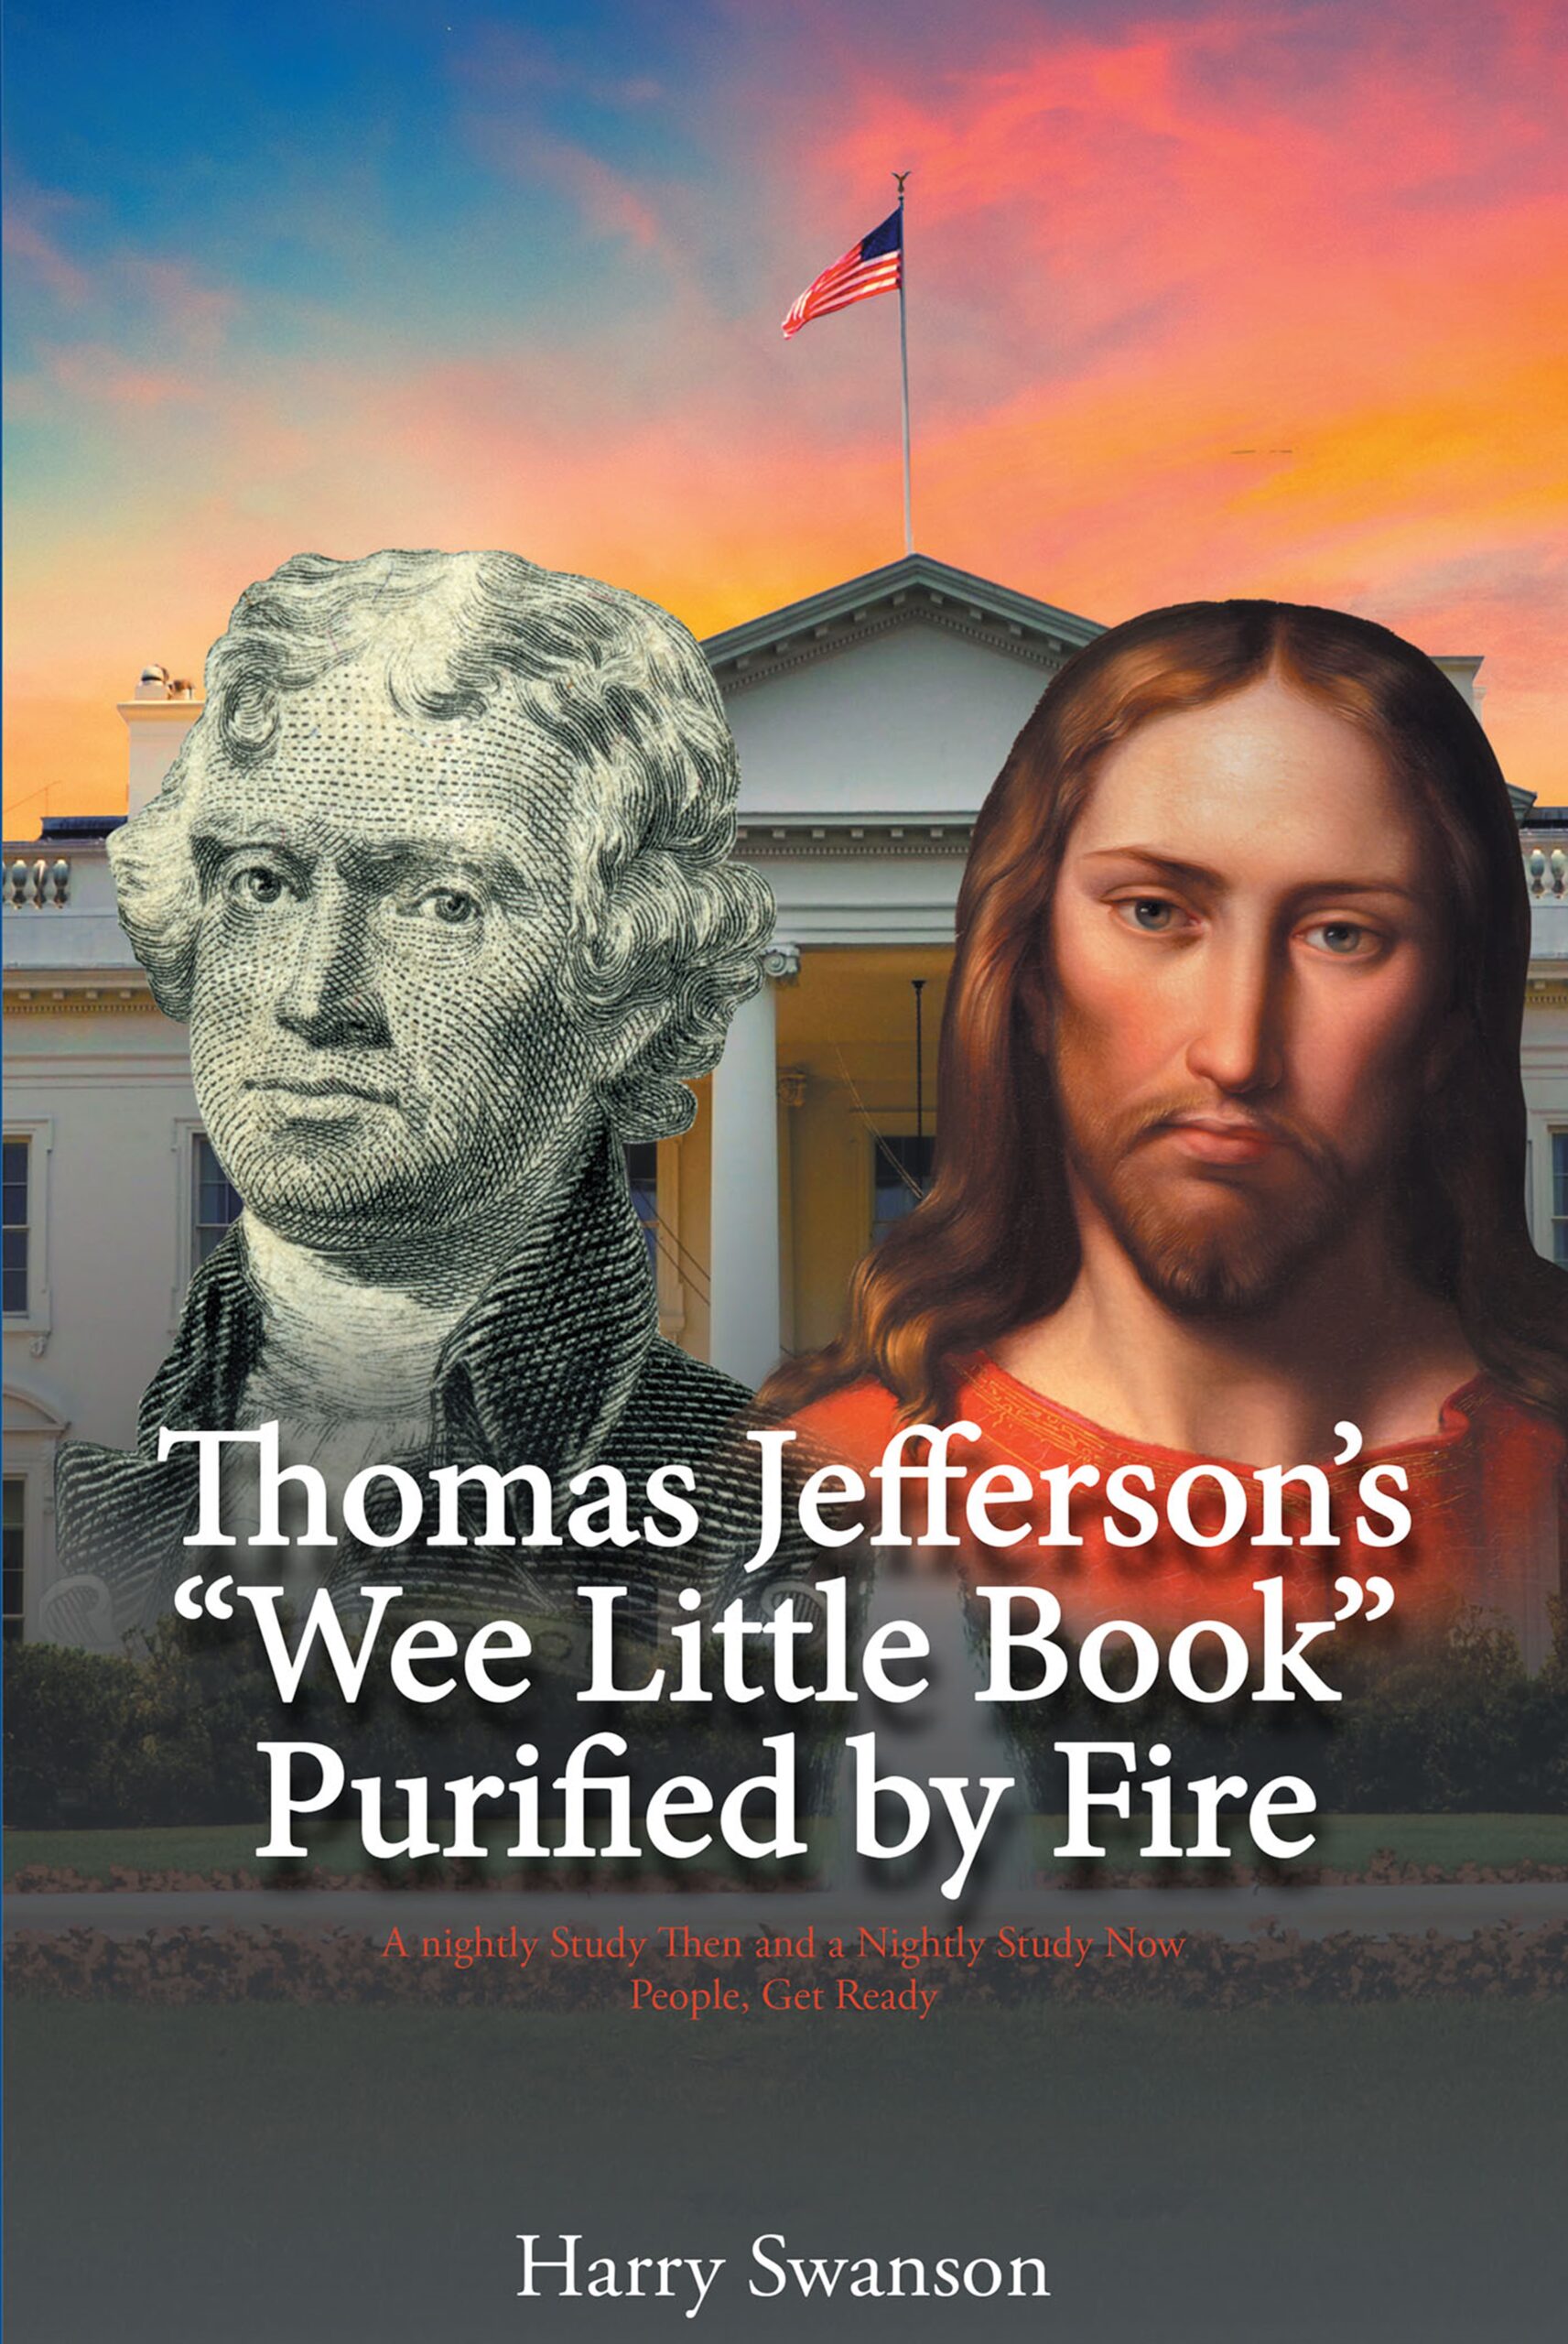 Thomas Jefferson's 'Wee Little Book' Purified by Fire by Harry Swanson